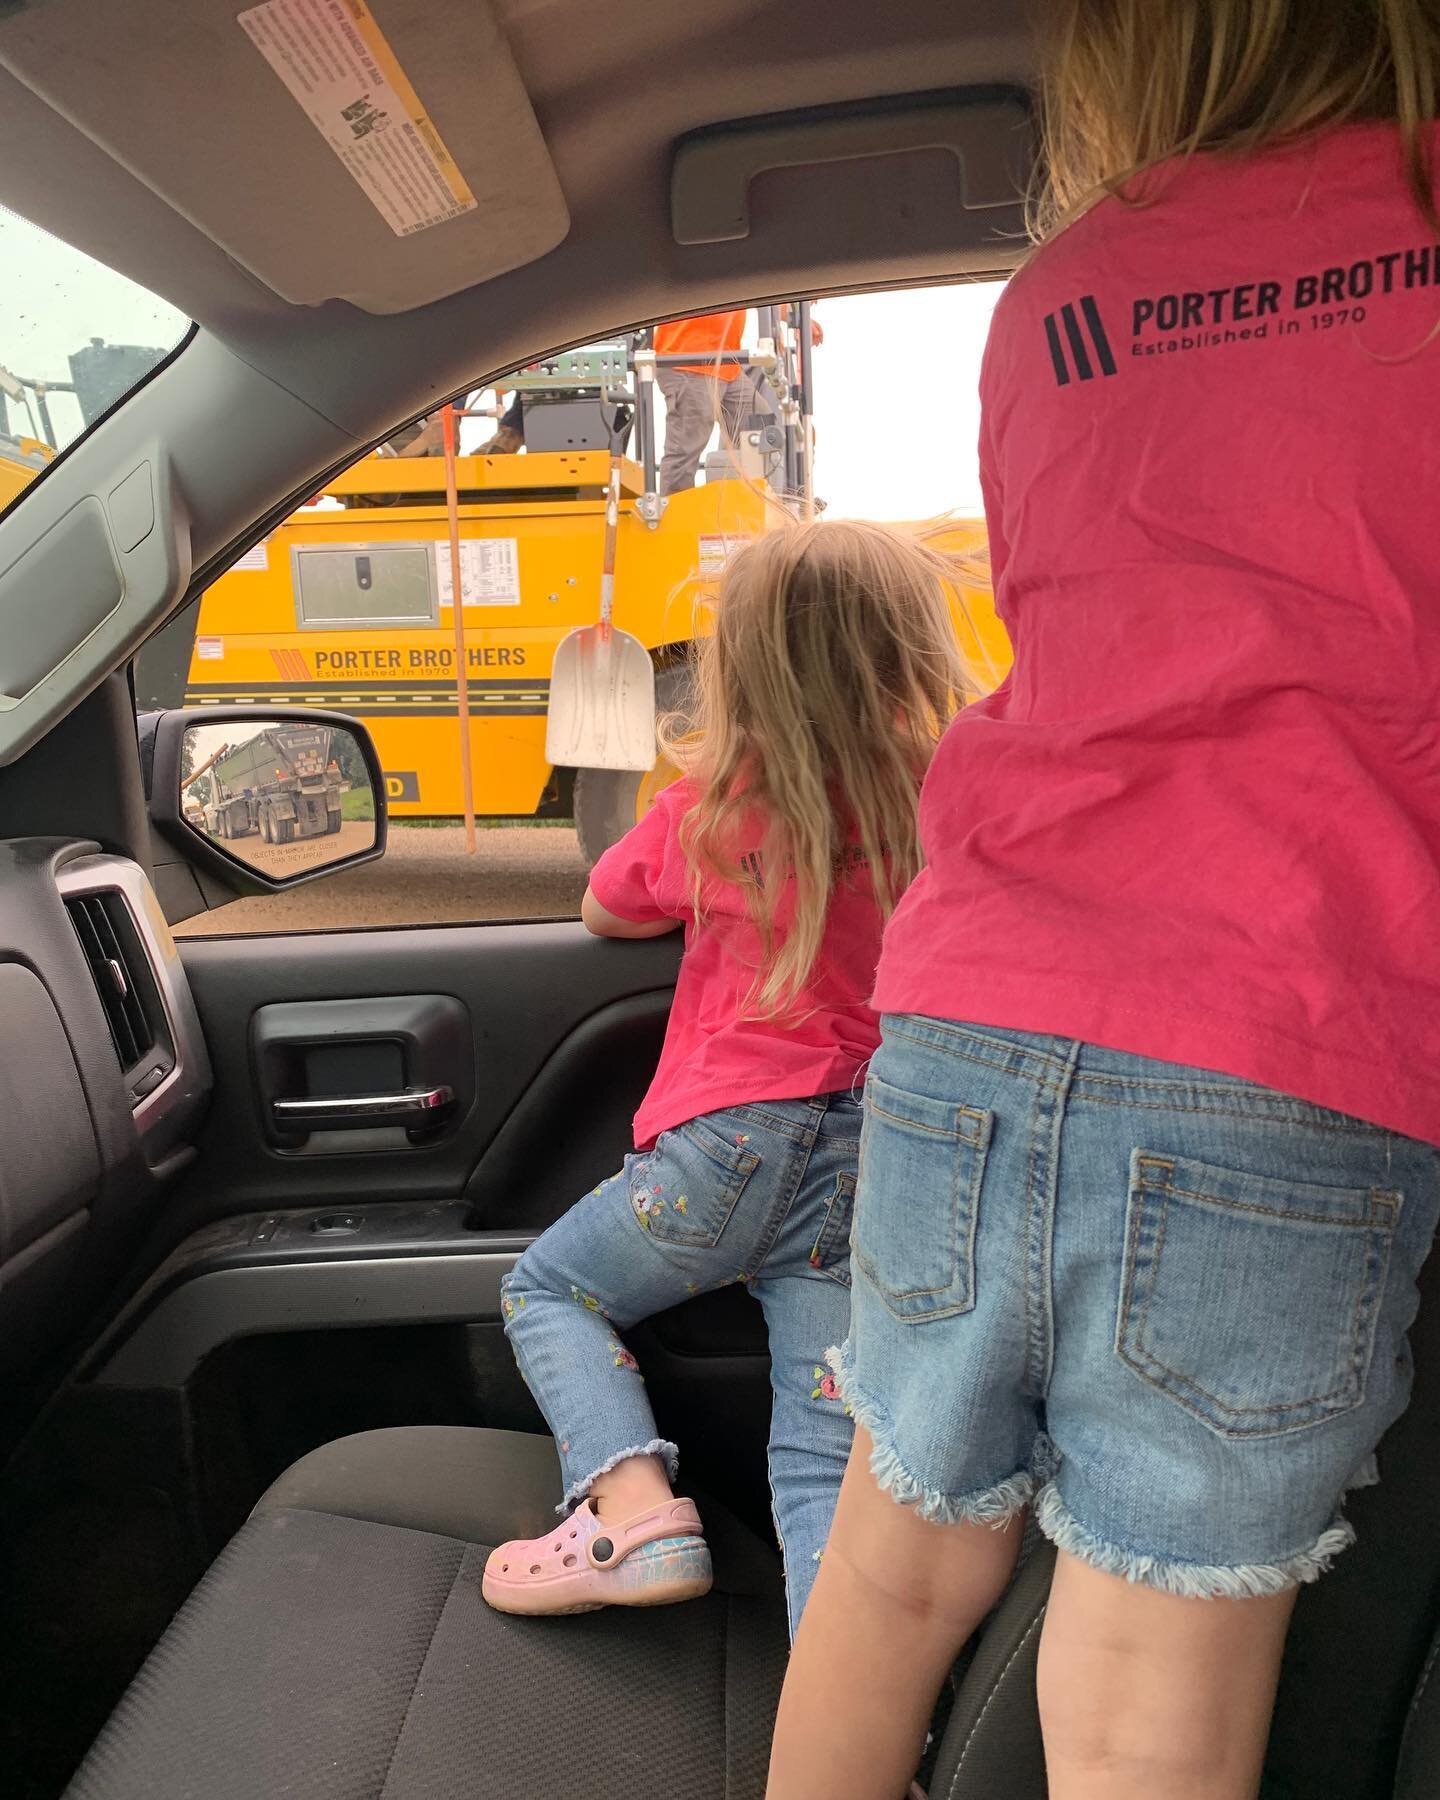 We had the fourth generation of Porter Brothers checking out today&rsquo;s chip sealing job. Guess we might need to consider a name change to Porter Daughters. ☺️

What do you think?